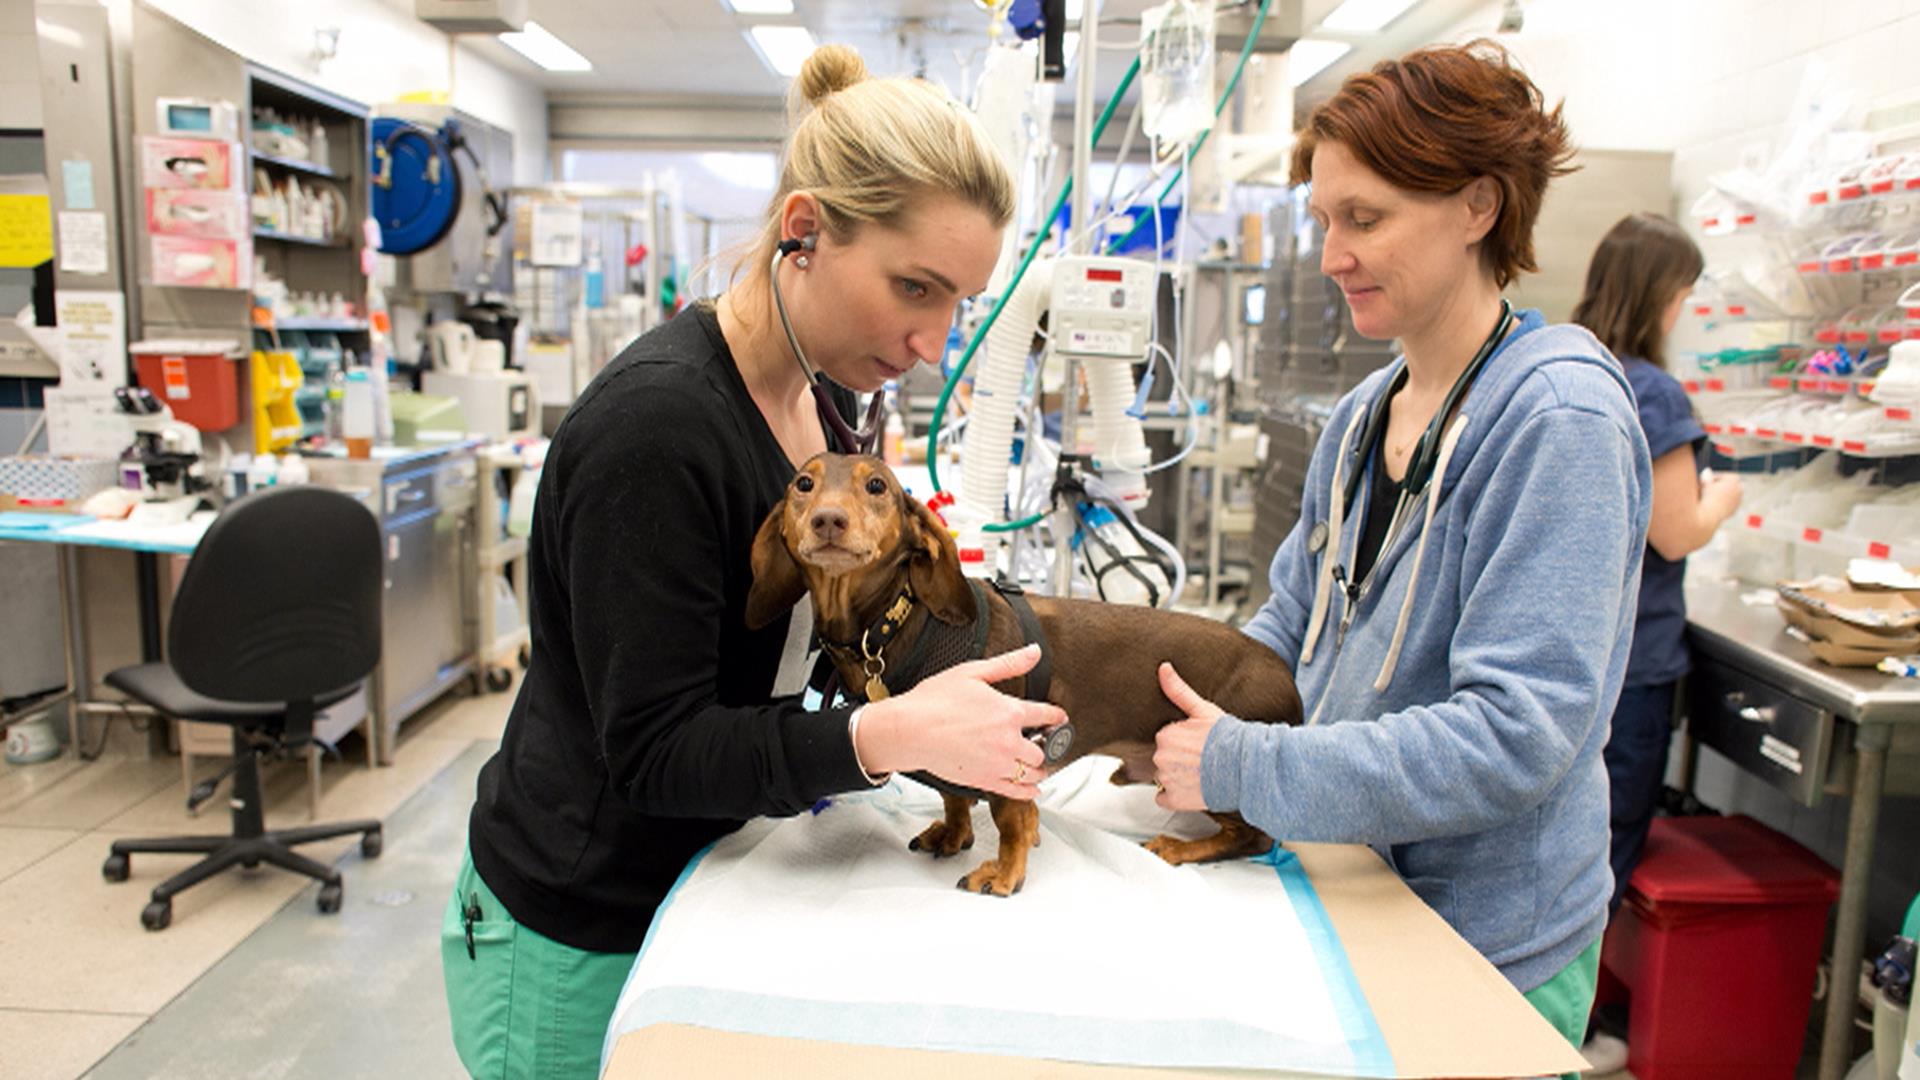 KLG gets blown away by NYC's 24/7 Animal Medical Center